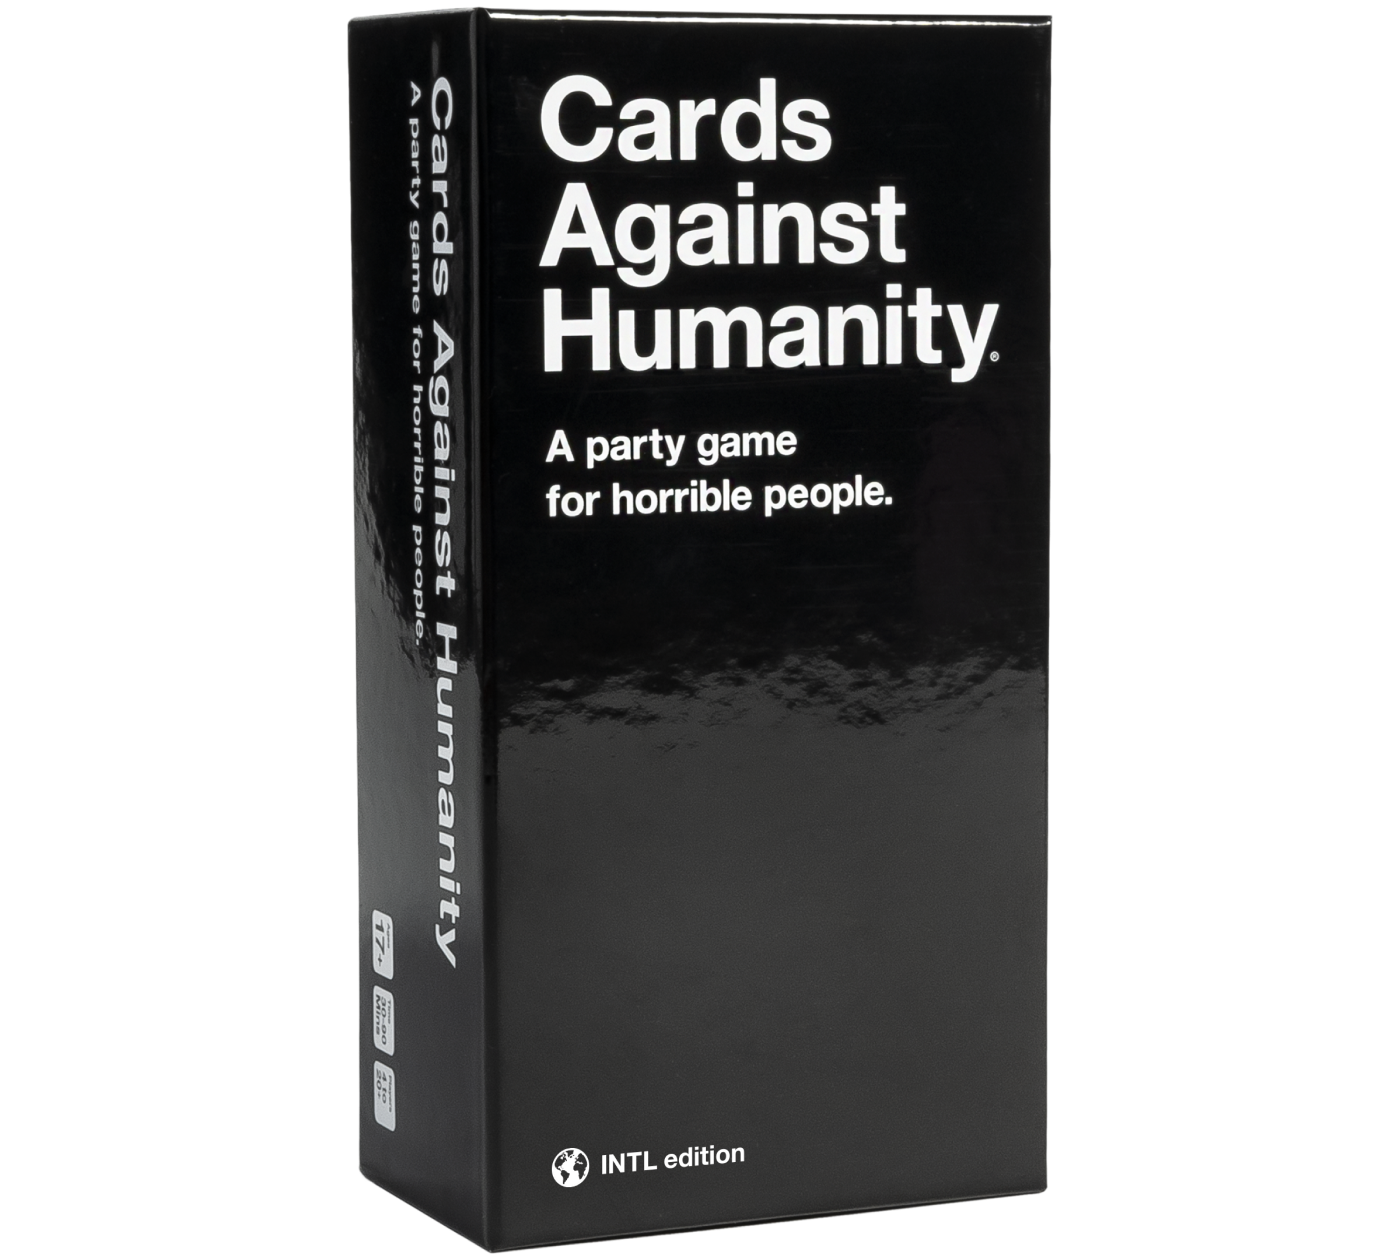 Cards Against Humanity UK V2.0 Latest Edition New Sealed 600 cards 